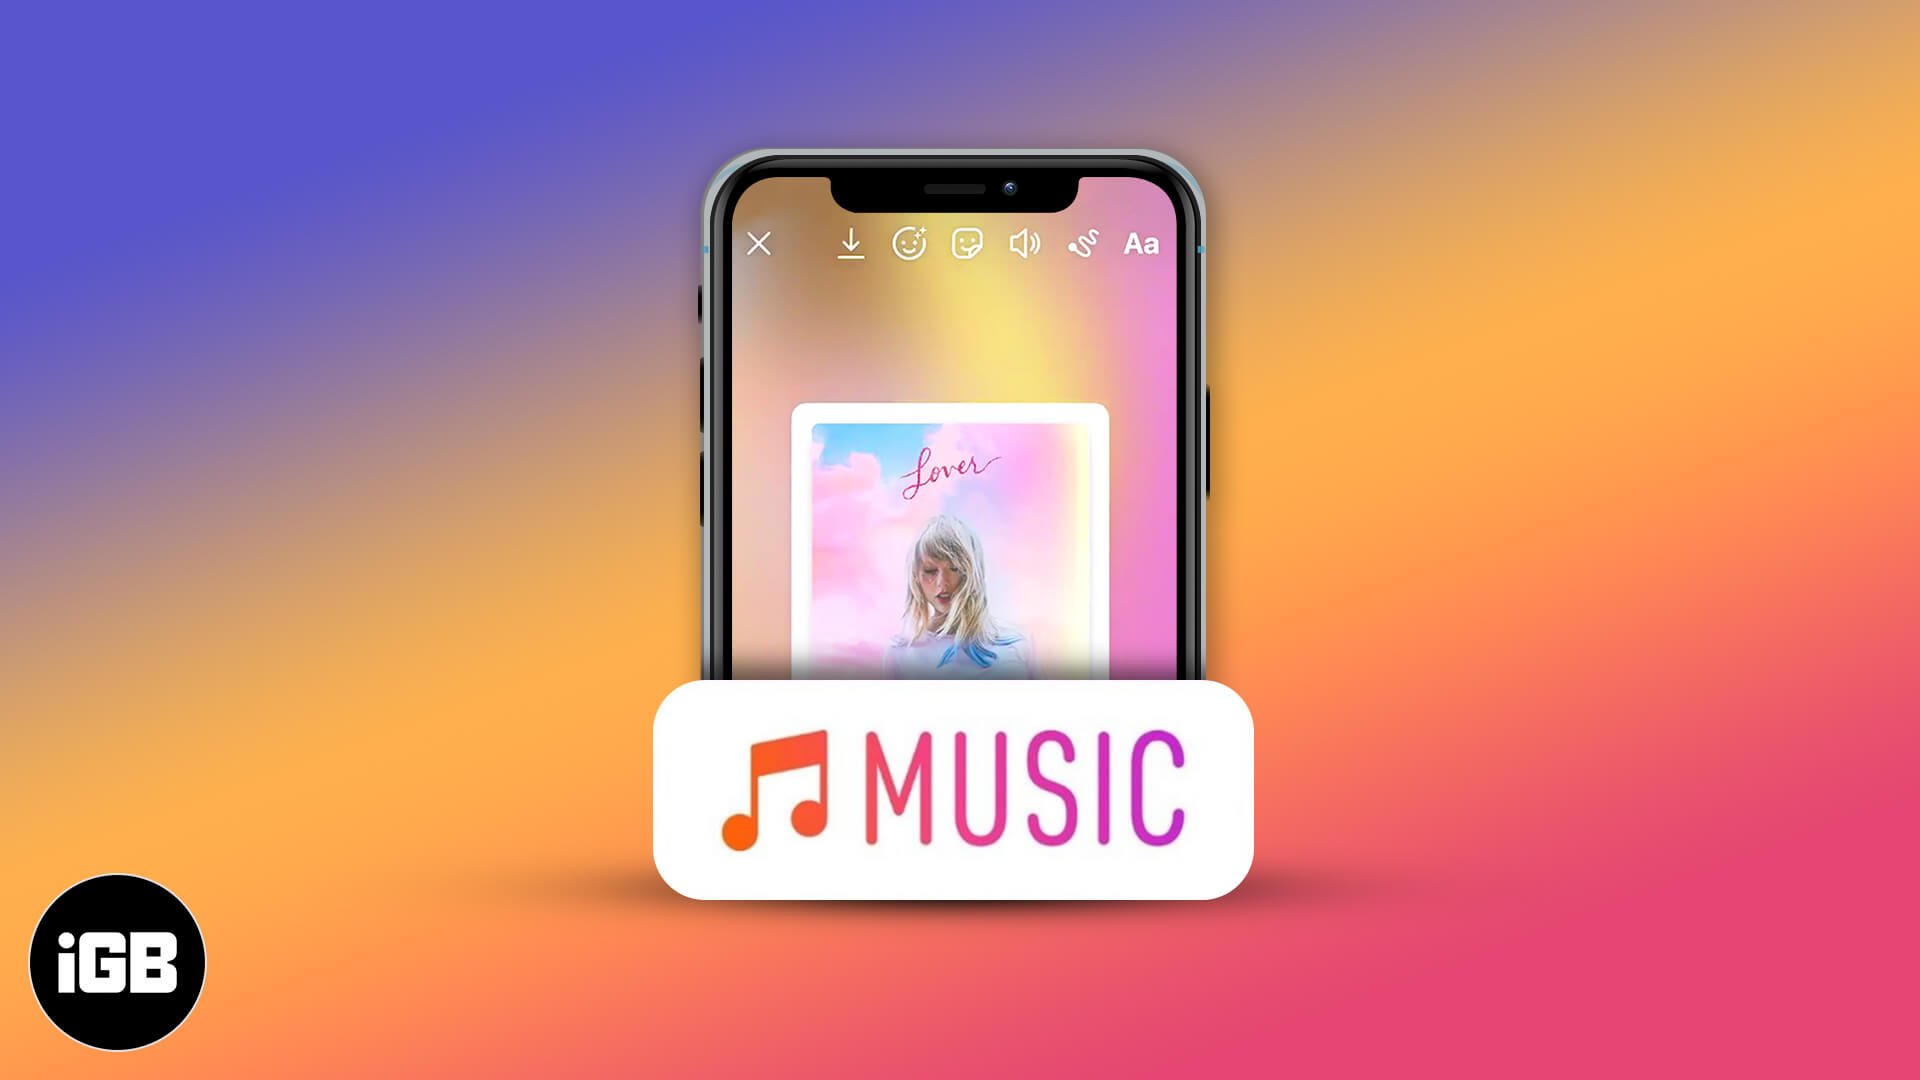 How to add music to instagram stories on iphone